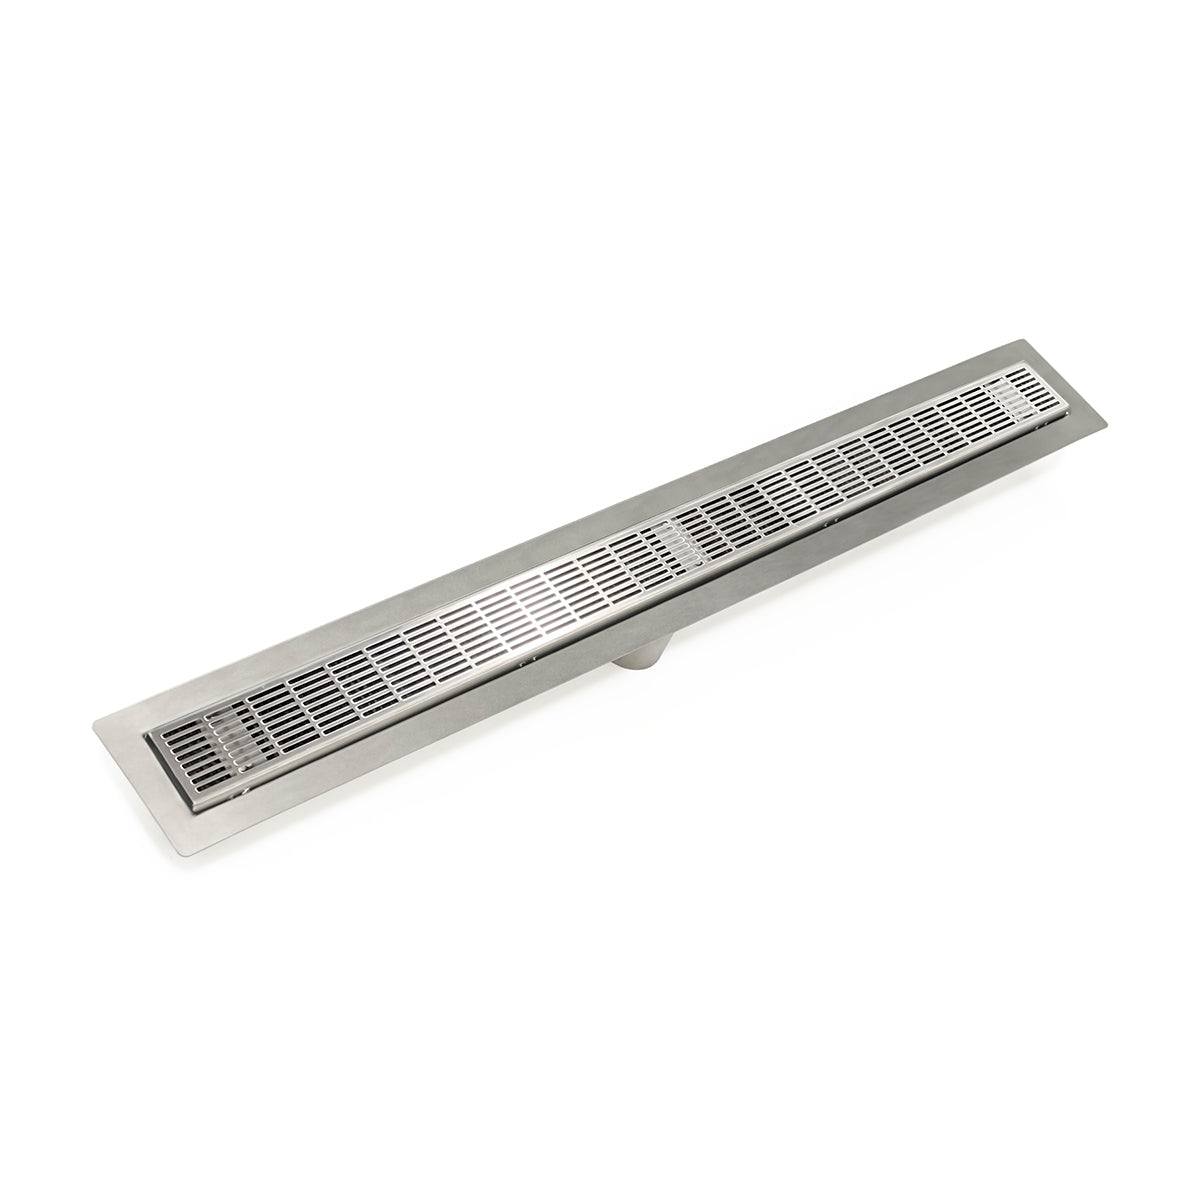 Infinity Drain 42" FF Series Fixed Flange Linear Drain Kit with 2 1/2" Perforated Slotted Grate